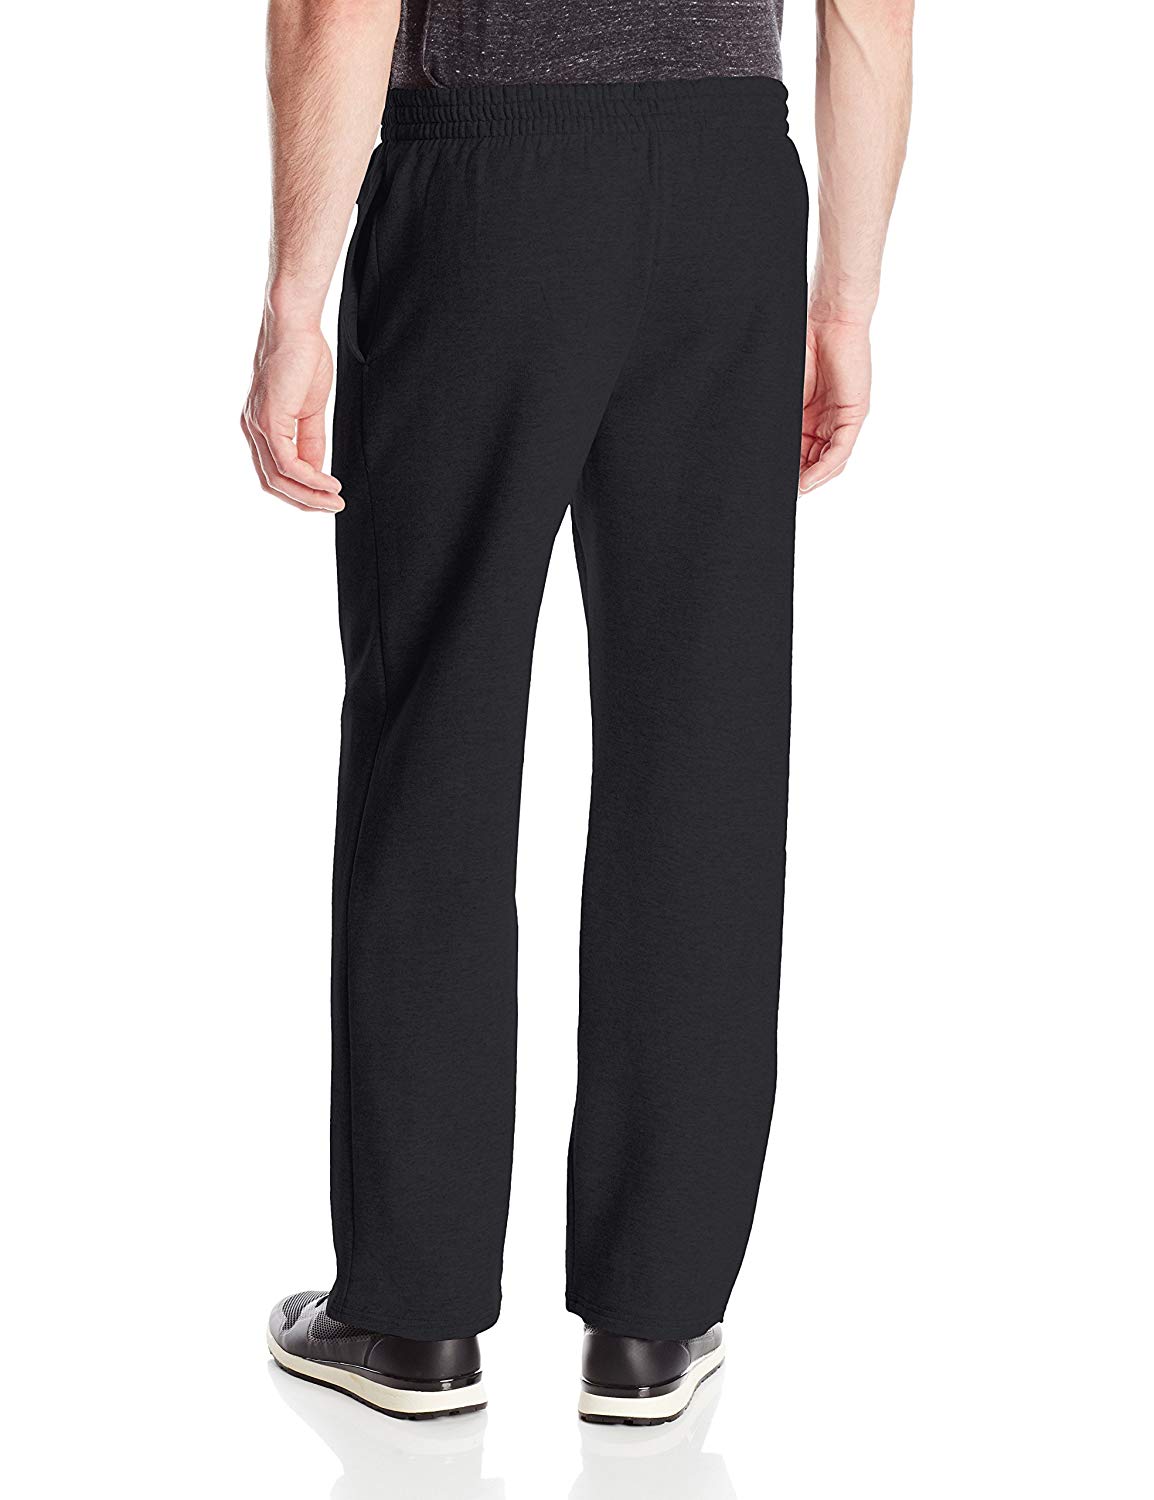 Fruit of the Loom Men's Pocketed Open-Bottom Sweatpant,, Black, Size X ...